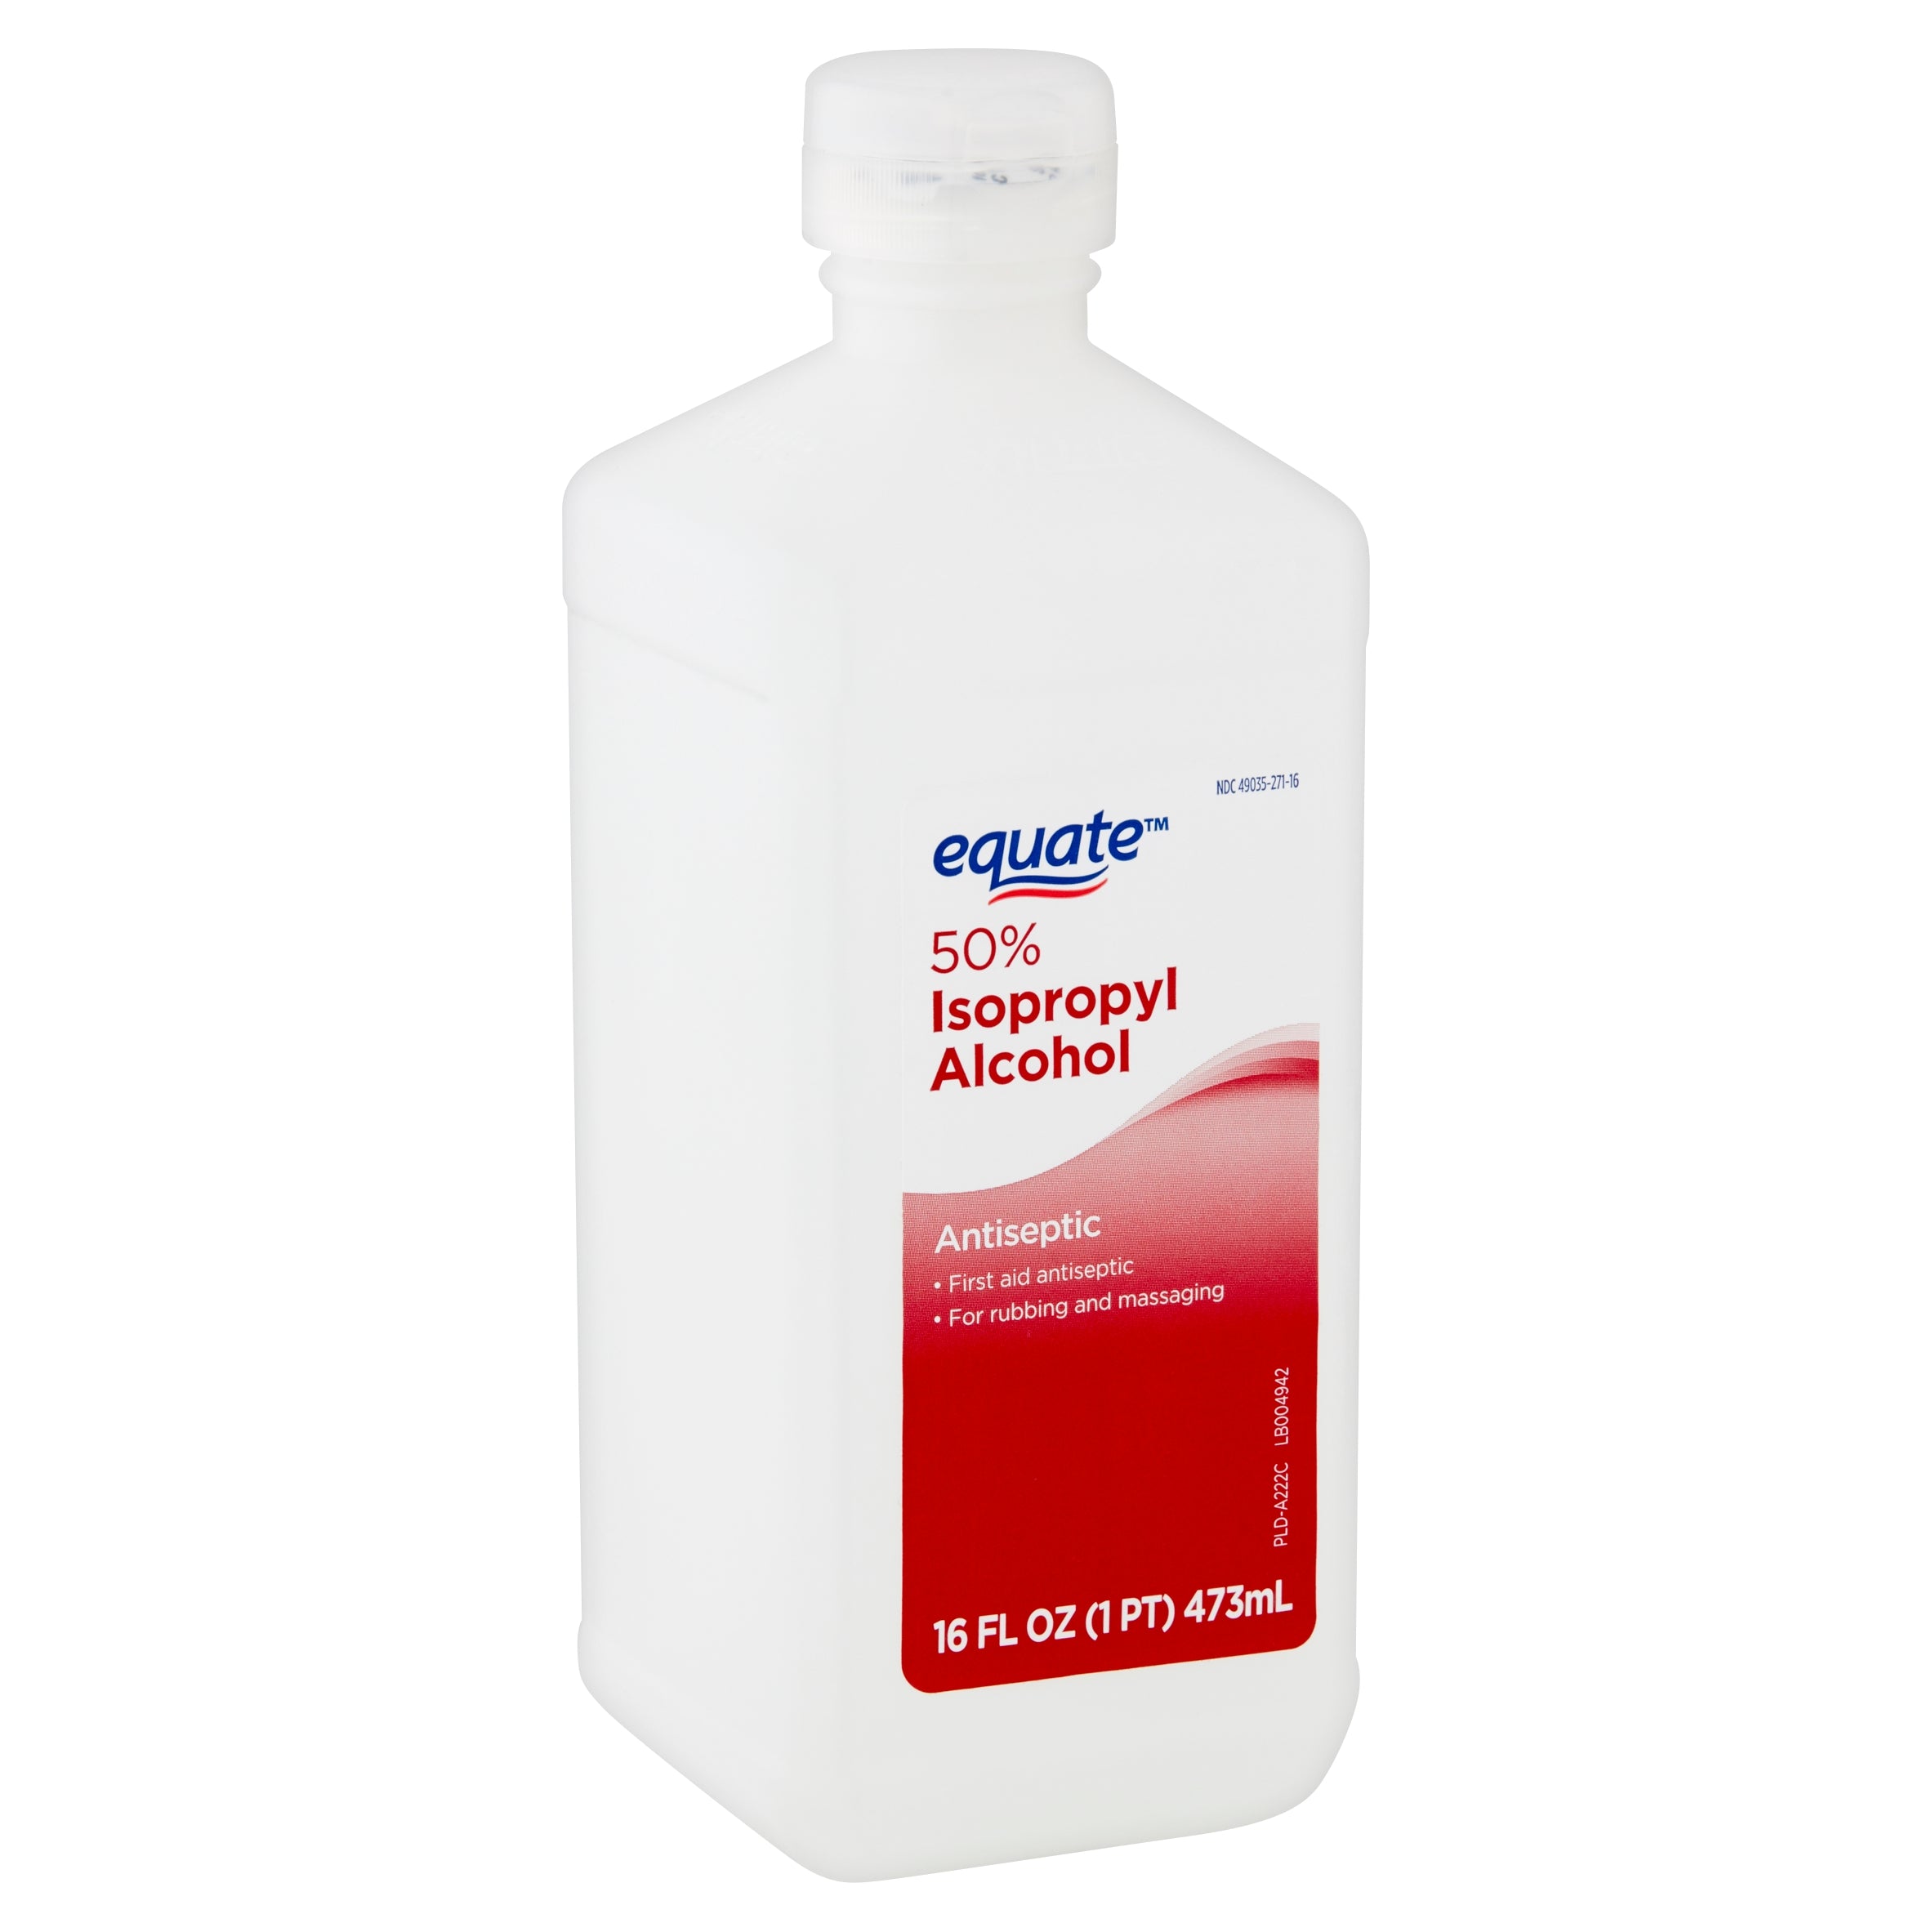 Isopropyl 70% Alcohol Antiseptic - Wintergreen scent - 16oz - up & up™